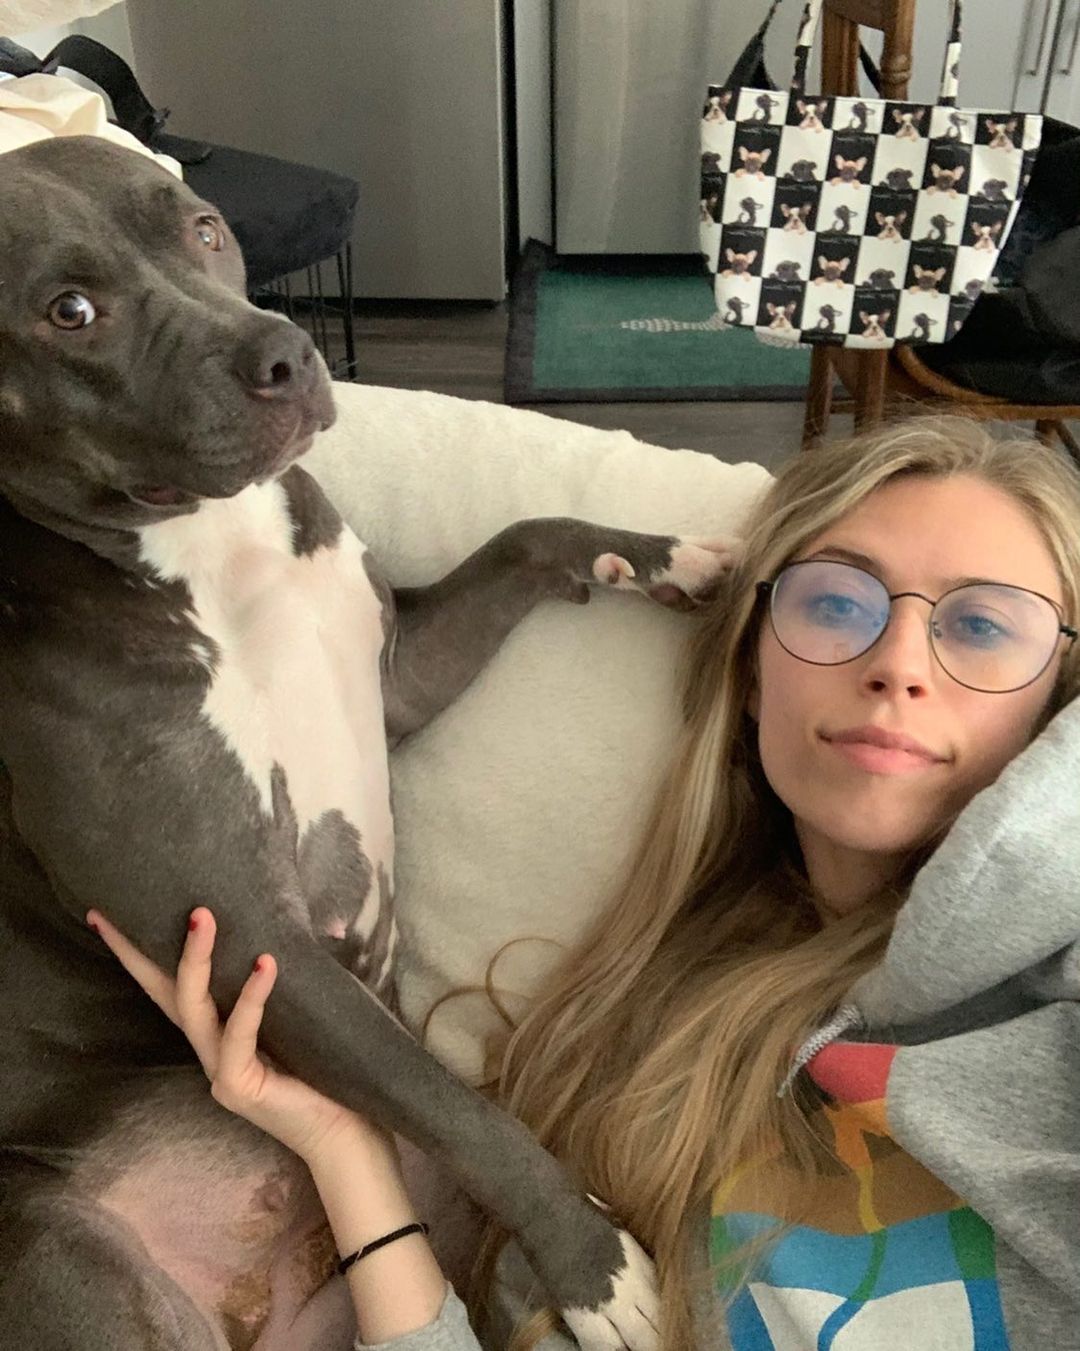 dog and woman lying on couch